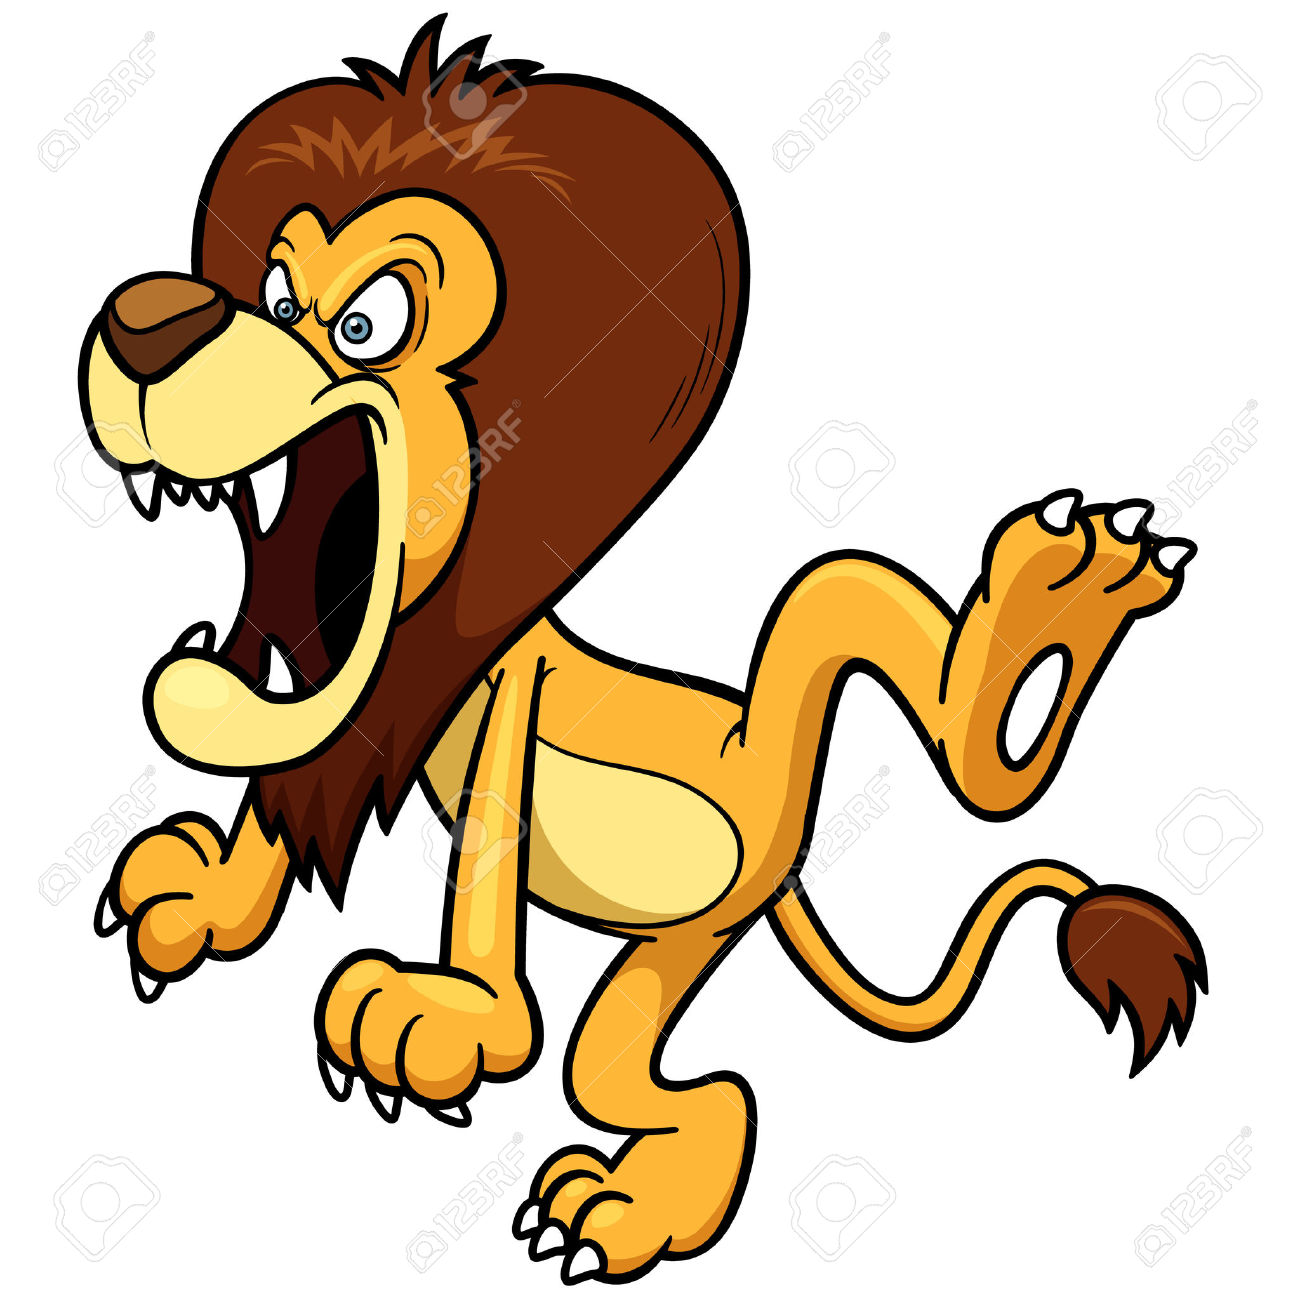 Roar clipart angry.